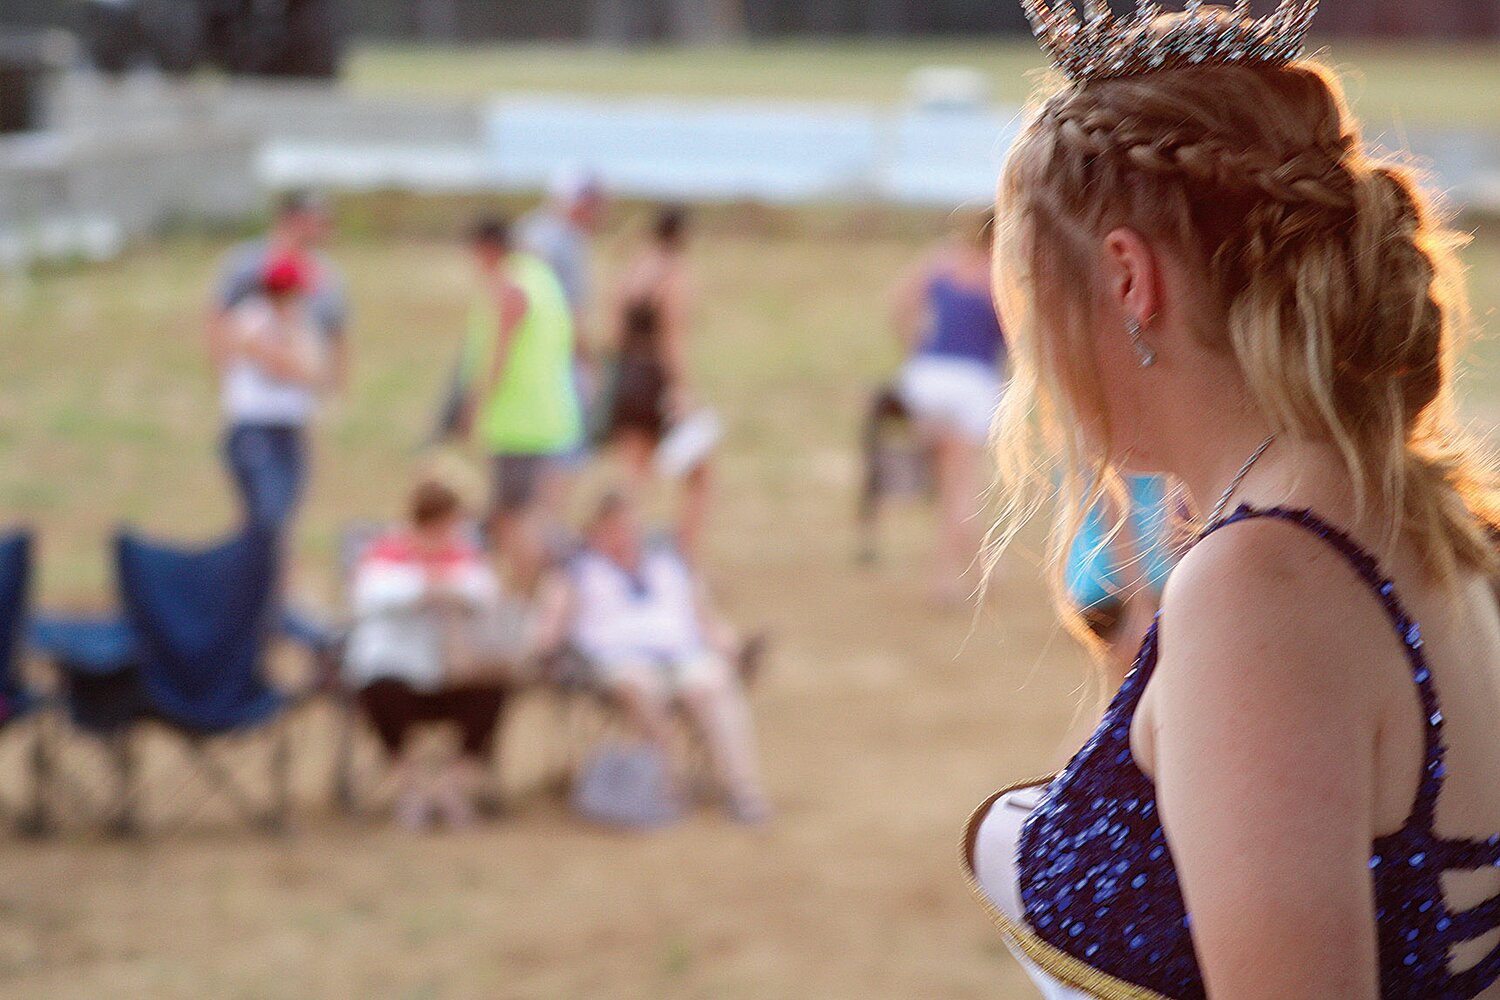 Queen Kelsey Miller surveyed her kingdom after receiving the crown at the 2023 Warren County Fair. Her kingdom now stretches across the state after being named Missouri State Fair queen.